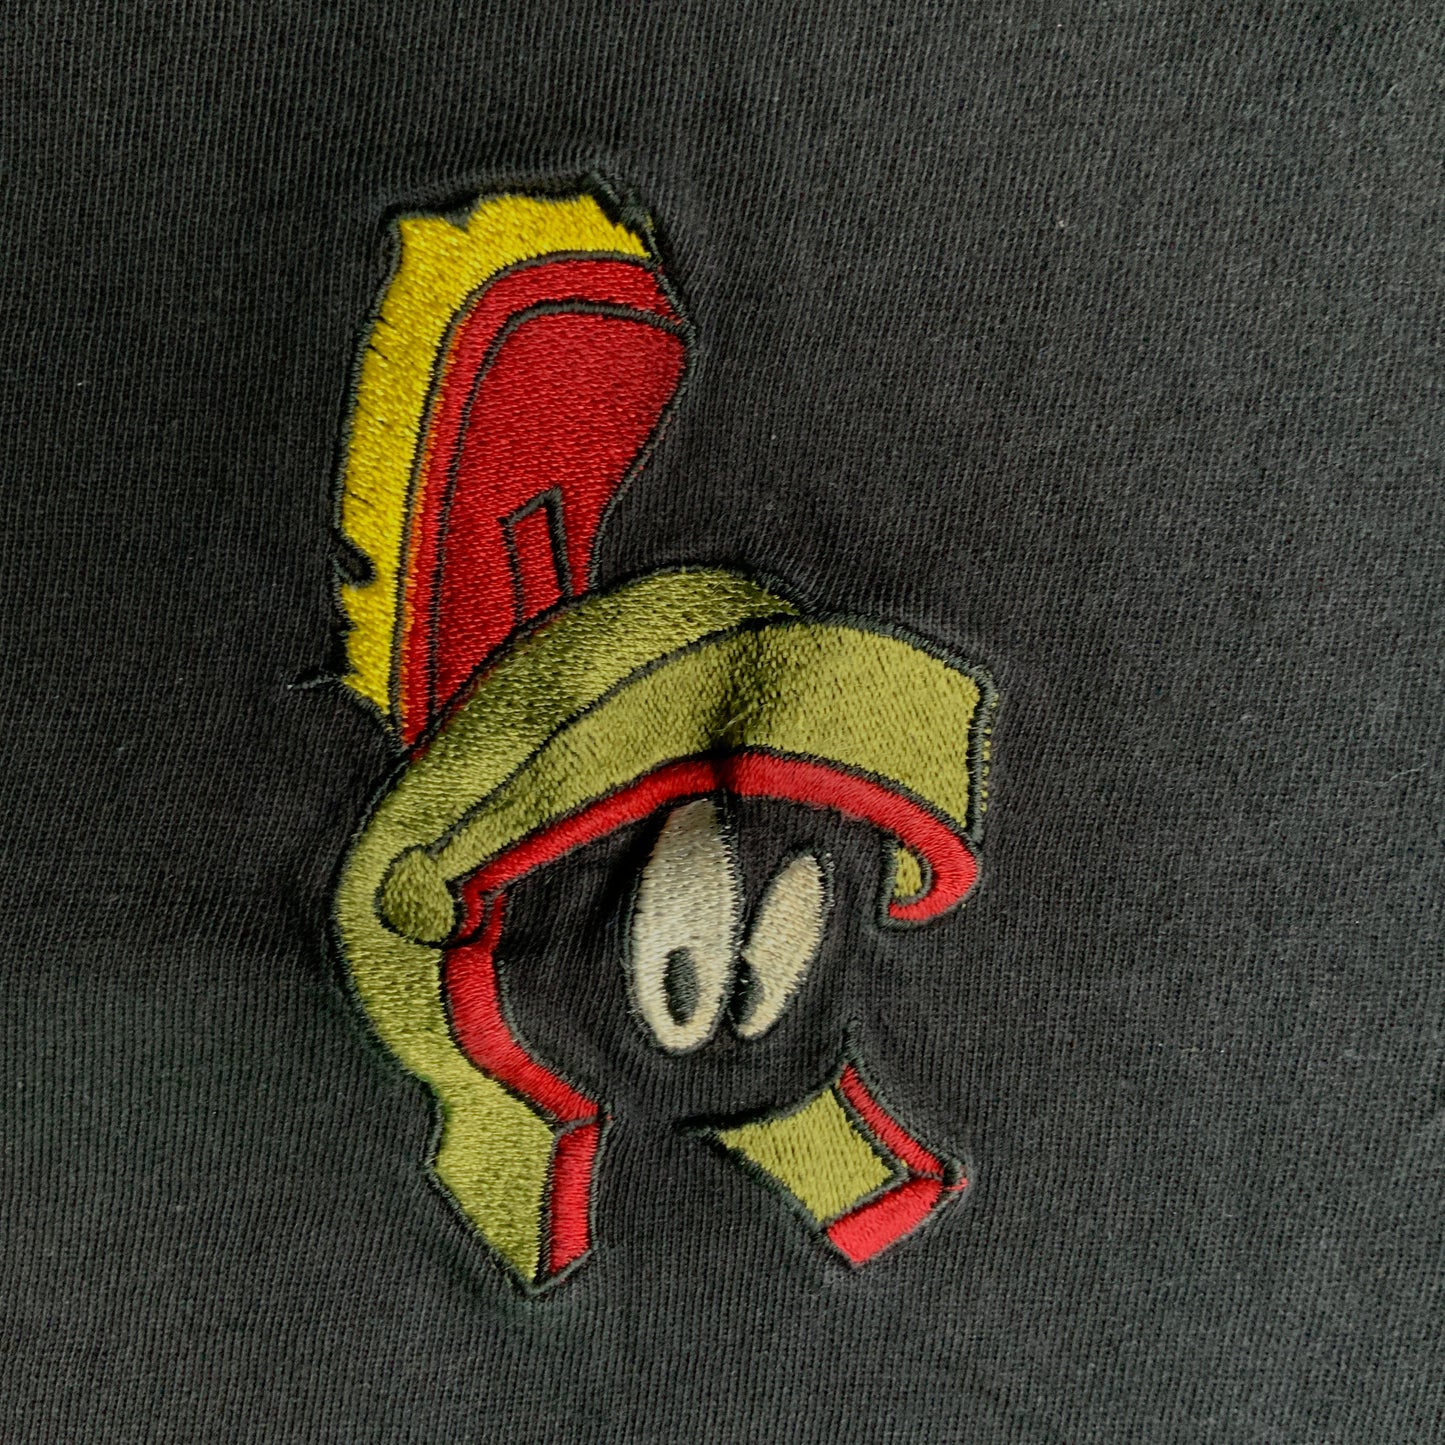 Marvin The Martian "Embroided" Shirt - XL